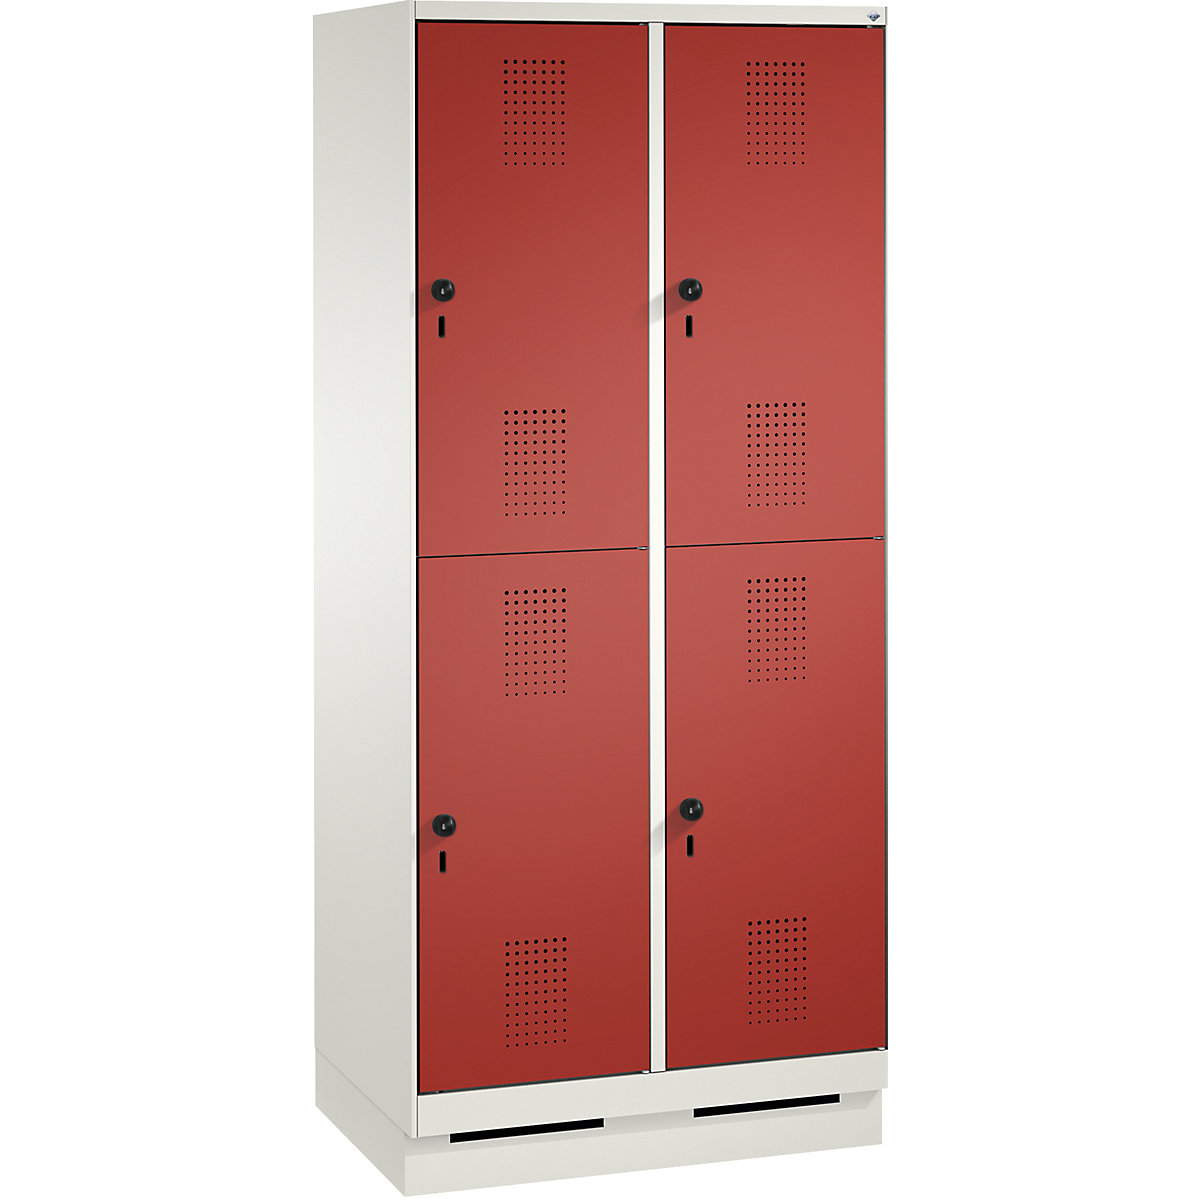 EVOLO cloakroom locker, double tier, with plinth – C+P, 2 compartments, 2 shelf compartments each, compartment width 400 mm, traffic white / flame red-13